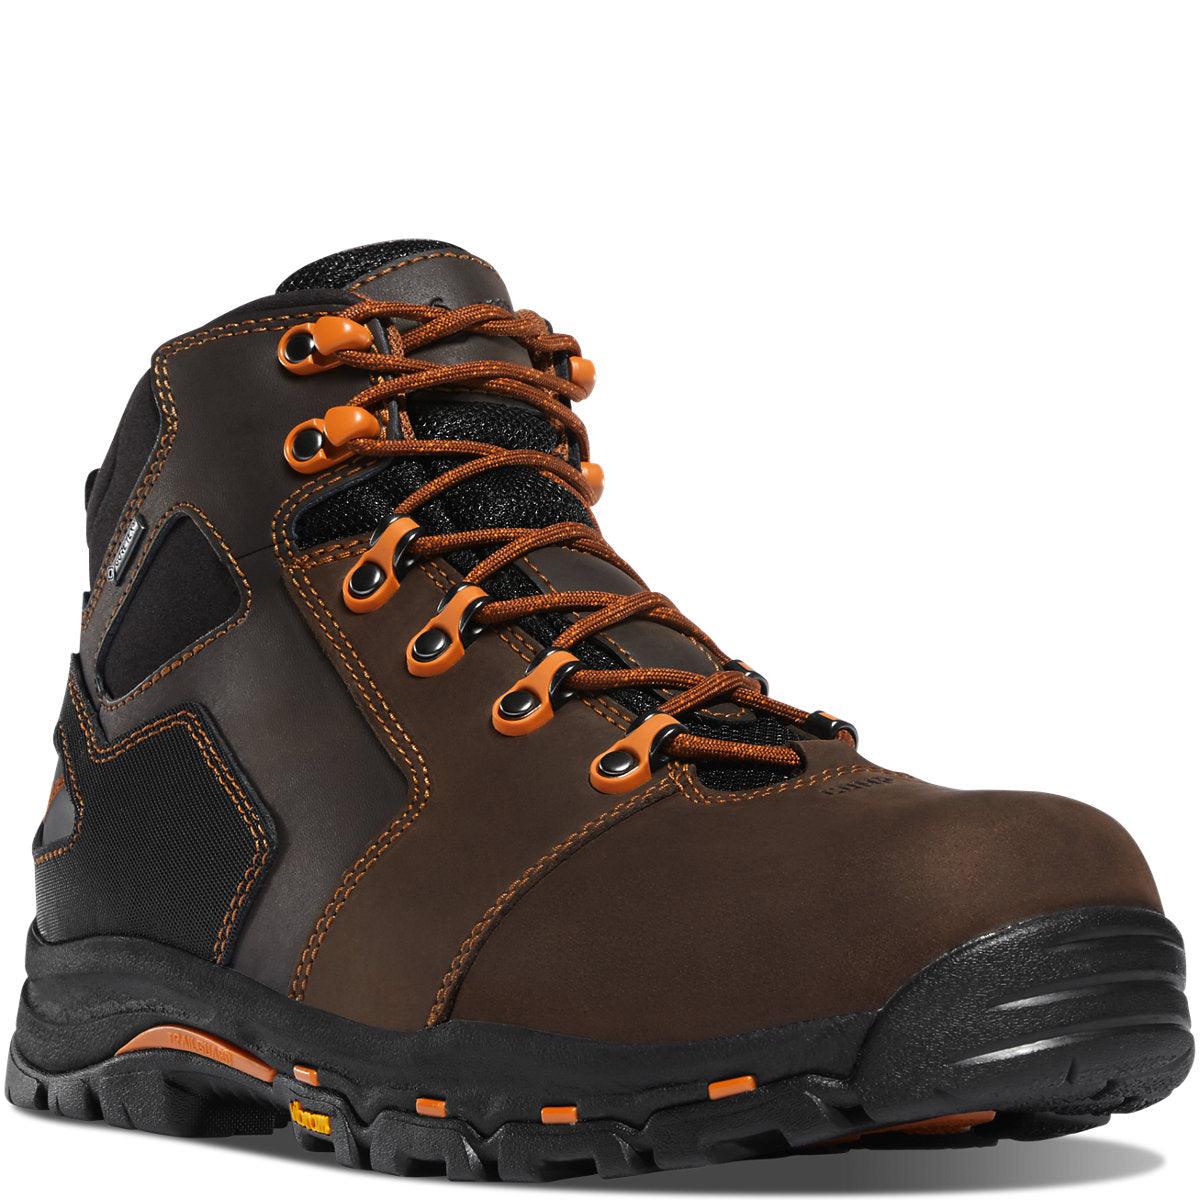 Men's Vicious Work Boot - 4.5" Brown / Orange - Purpose-Built / Home of the Trades